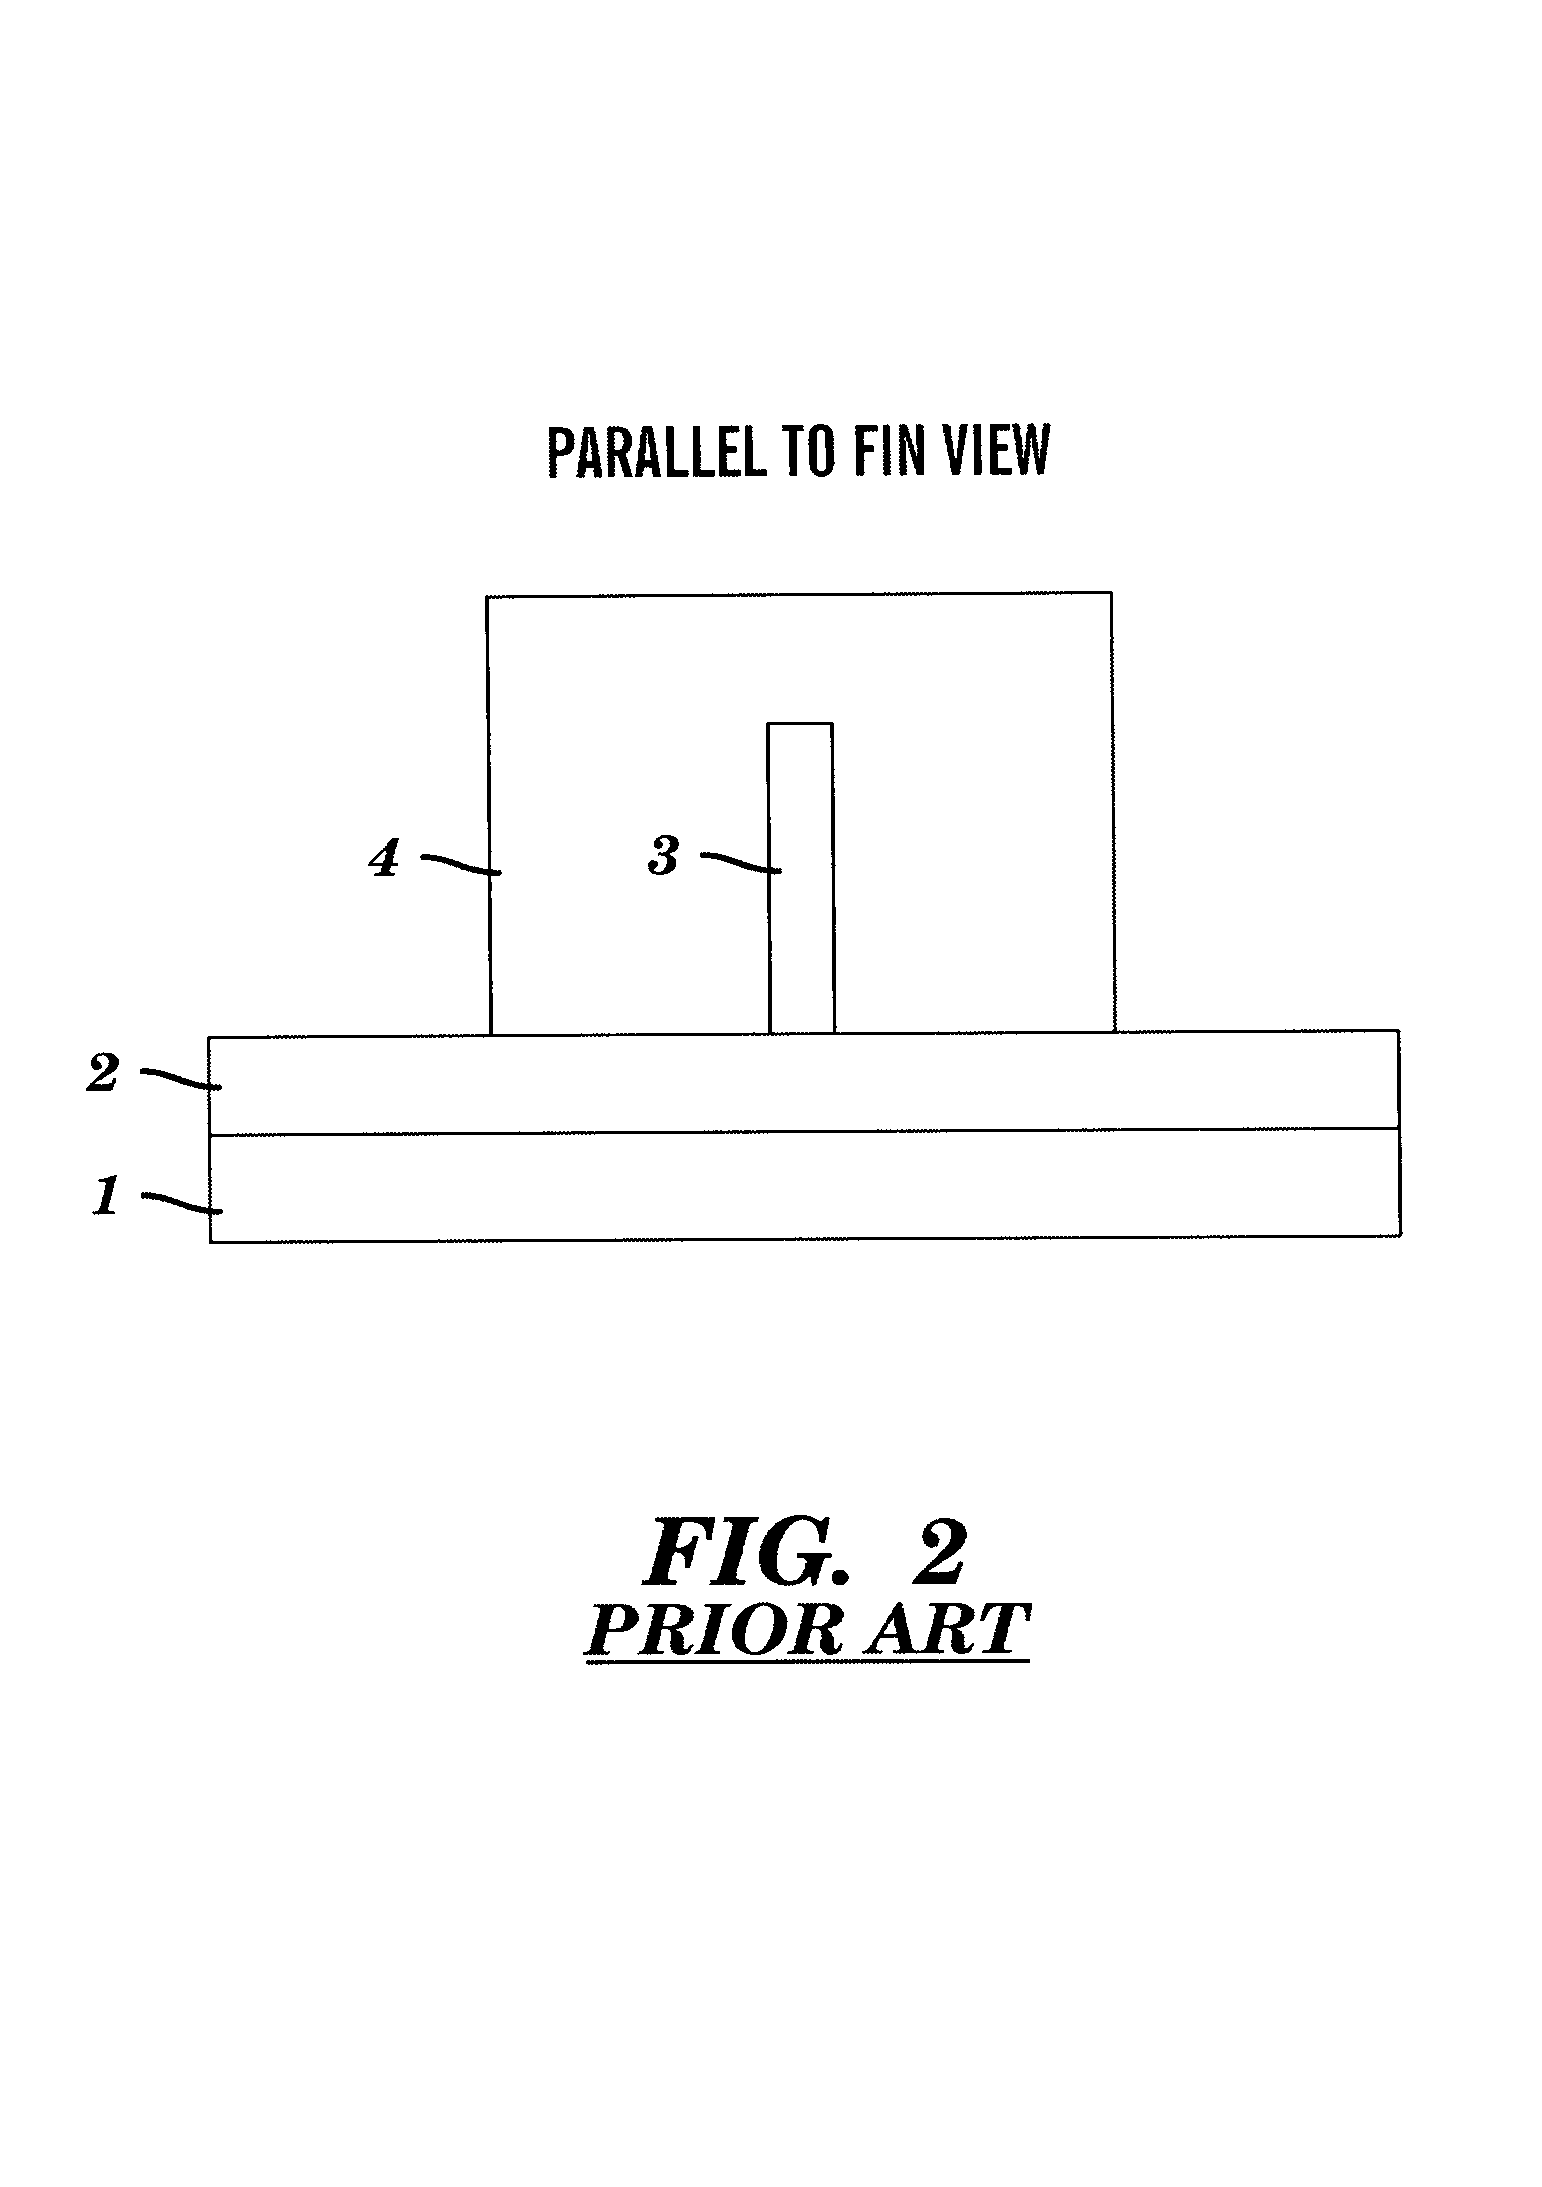 Strained finFET CMOS device structures